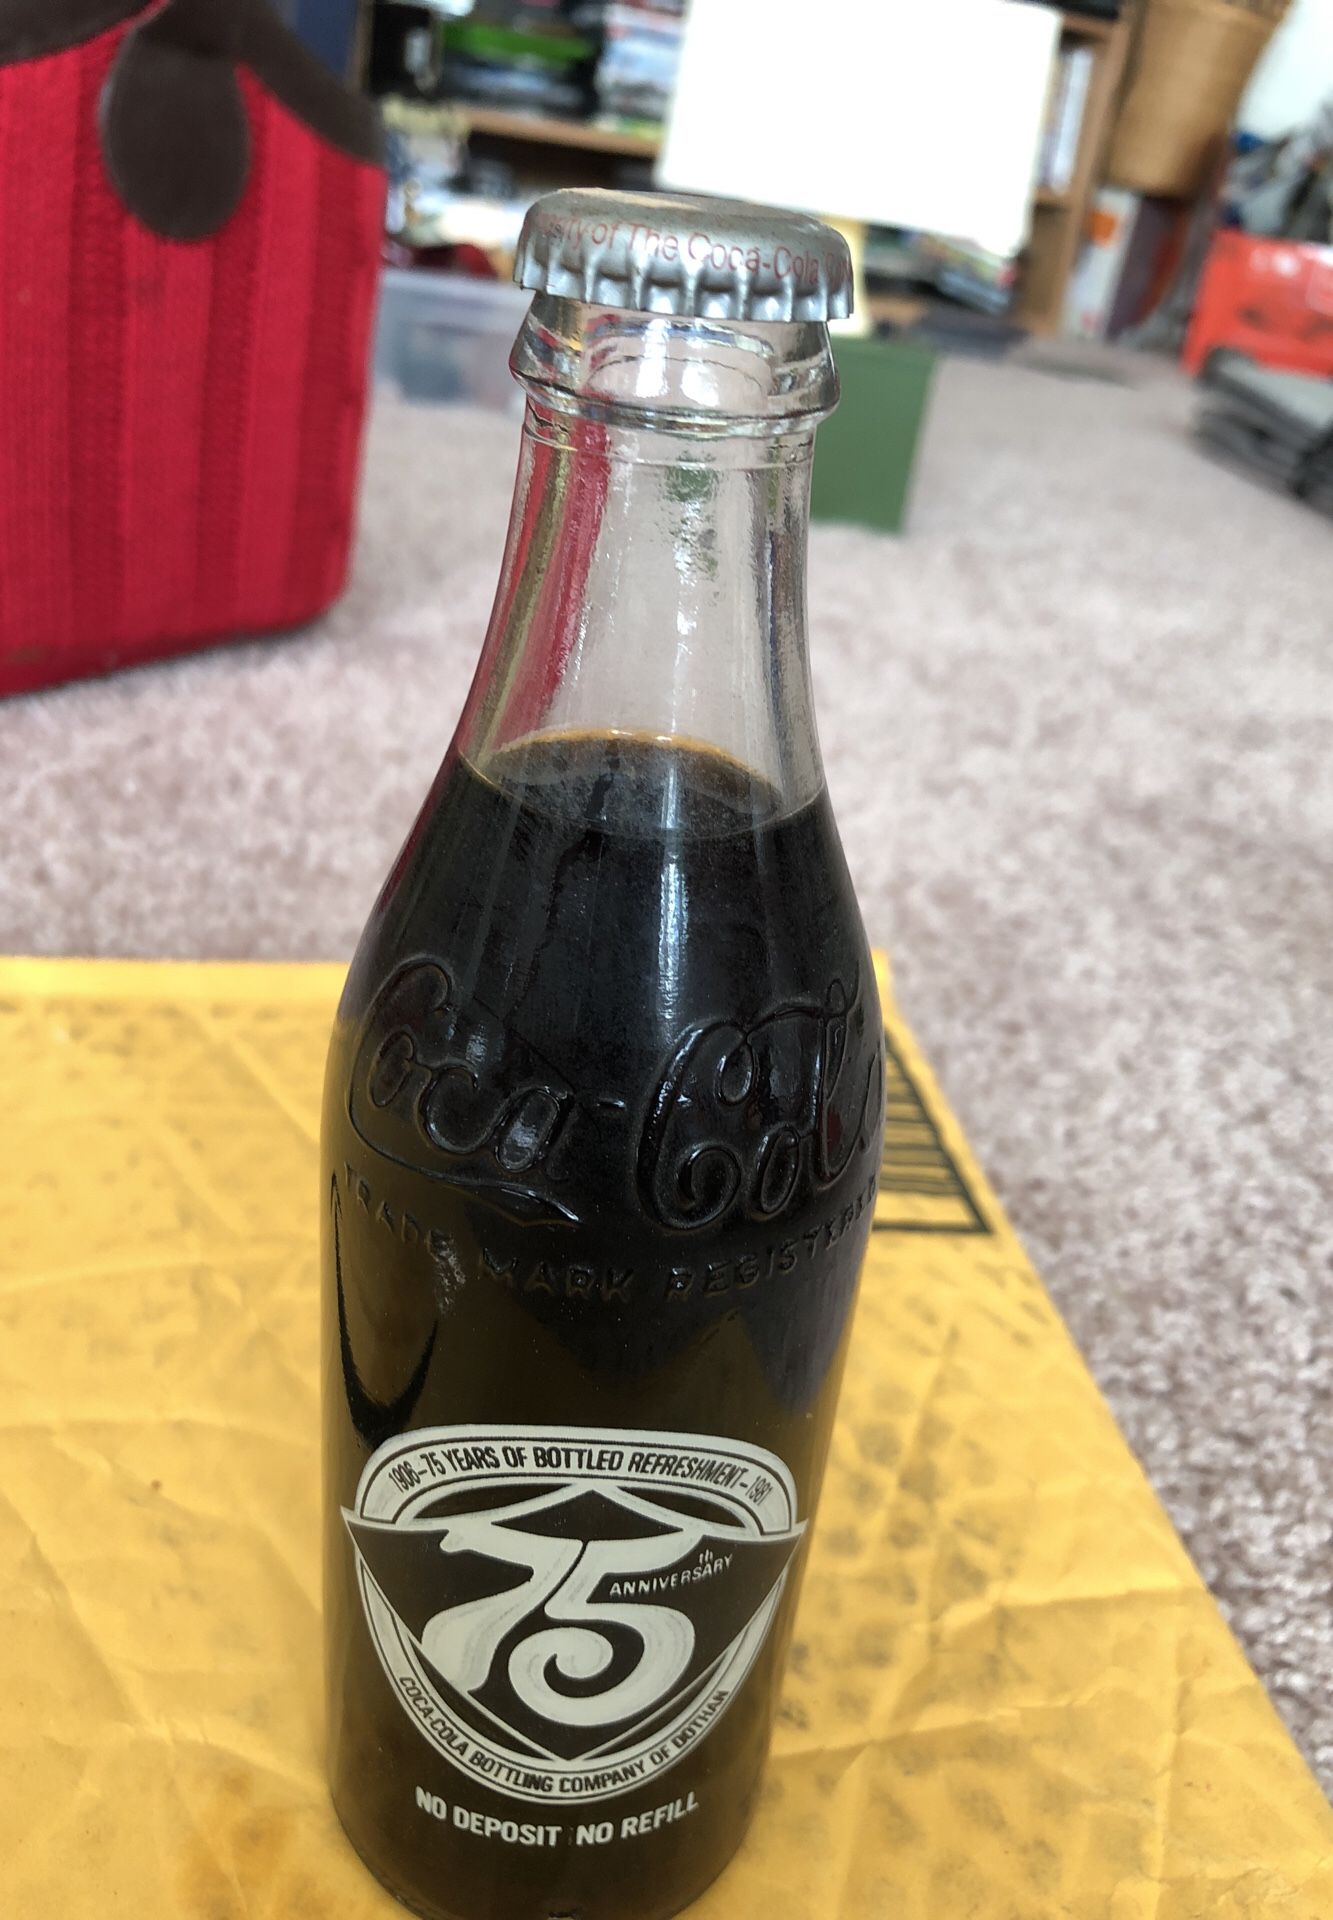 Collectible 43 year old Coca-Cola bottle commemorating 75th Anniversary of Coca-Cola history in 1975 Make offer